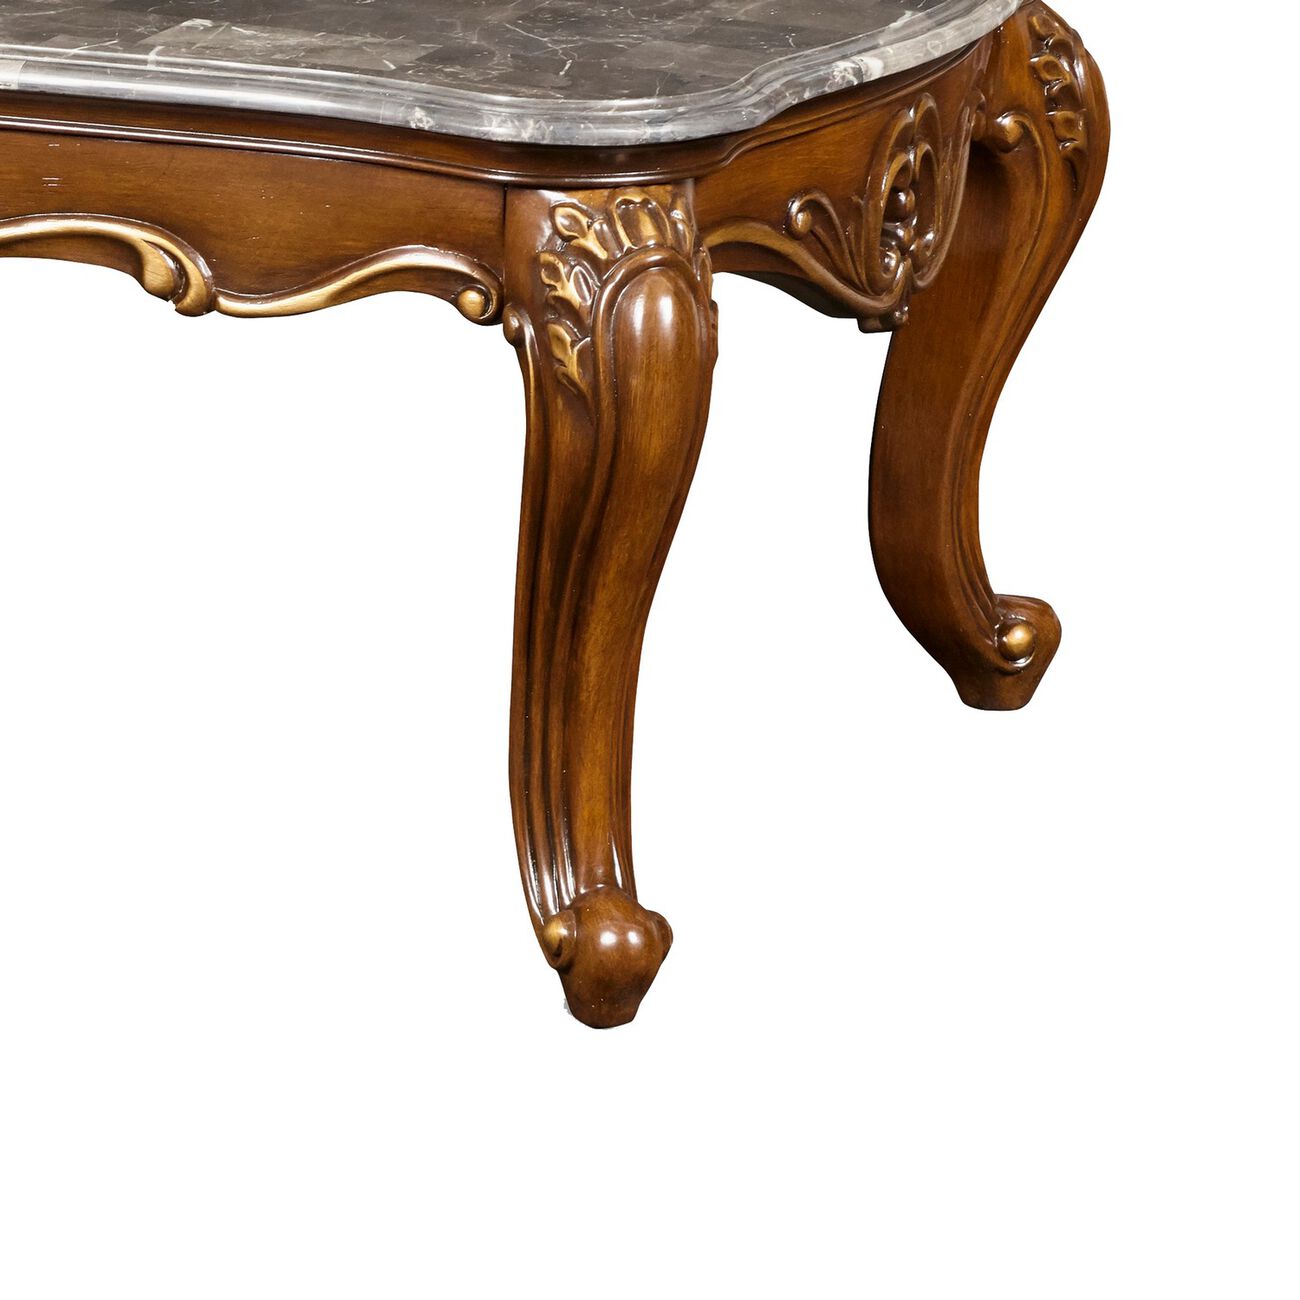 Wooden Cocktail Table with Marble Top and Carved Details, Gray and Brown